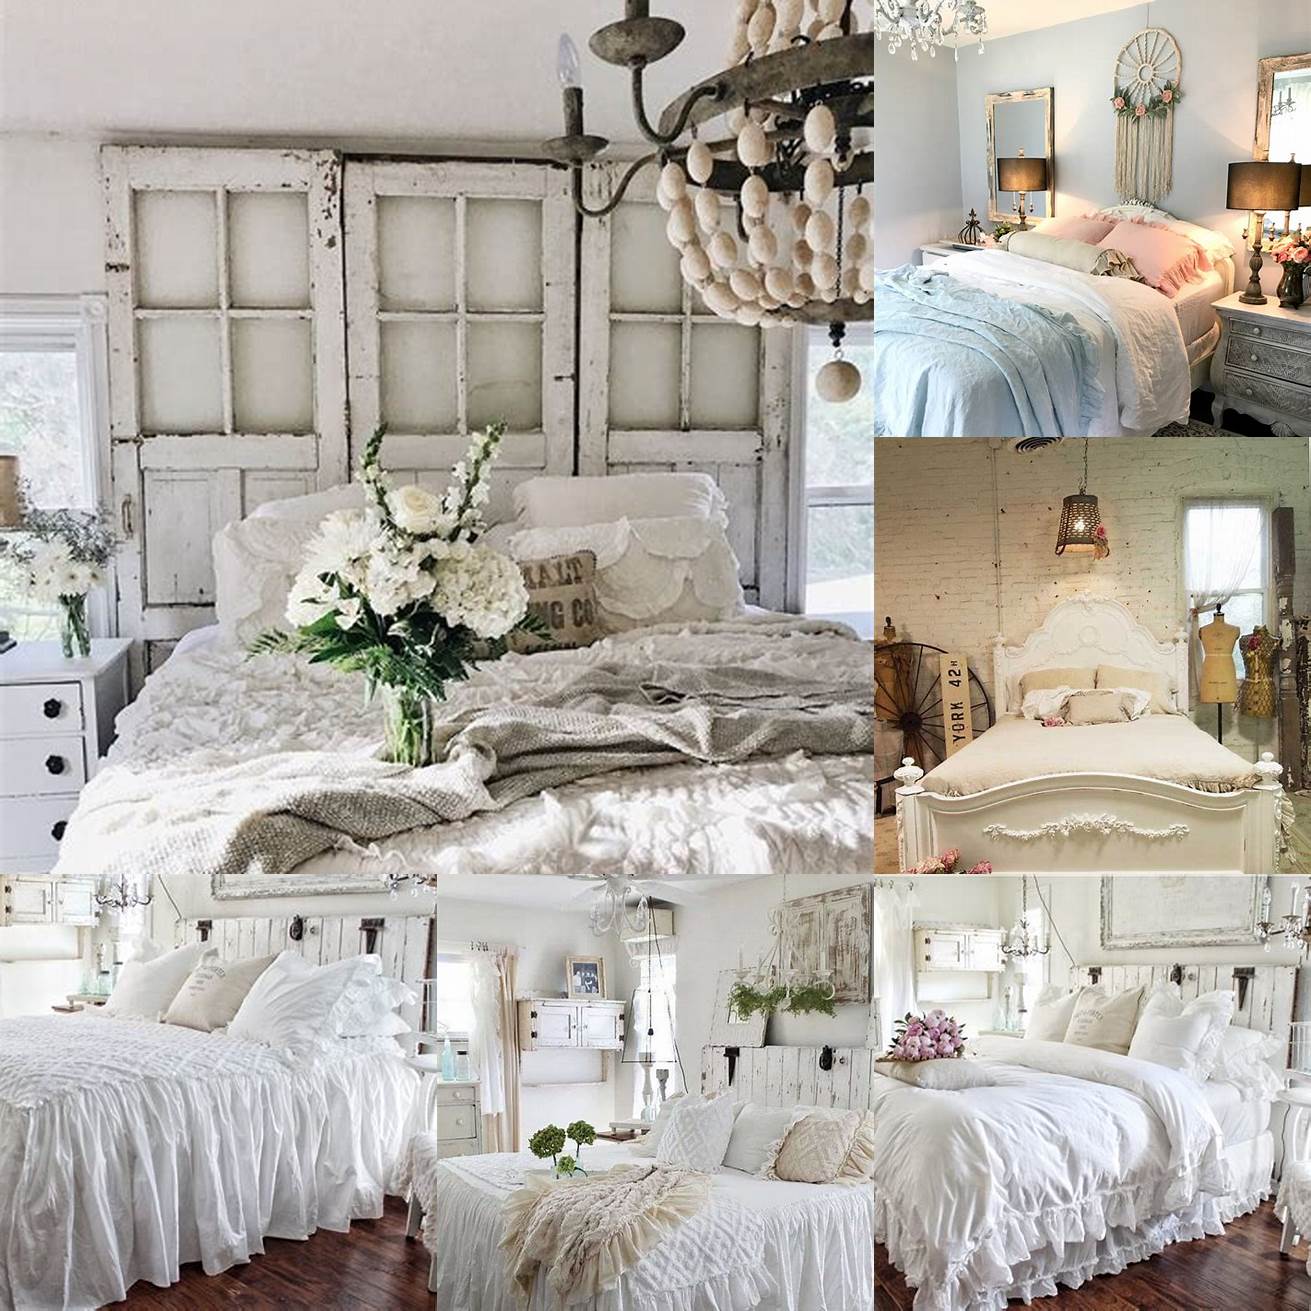 This beautiful Shabby Chic bed features a distressed white frame and soft floral bedding